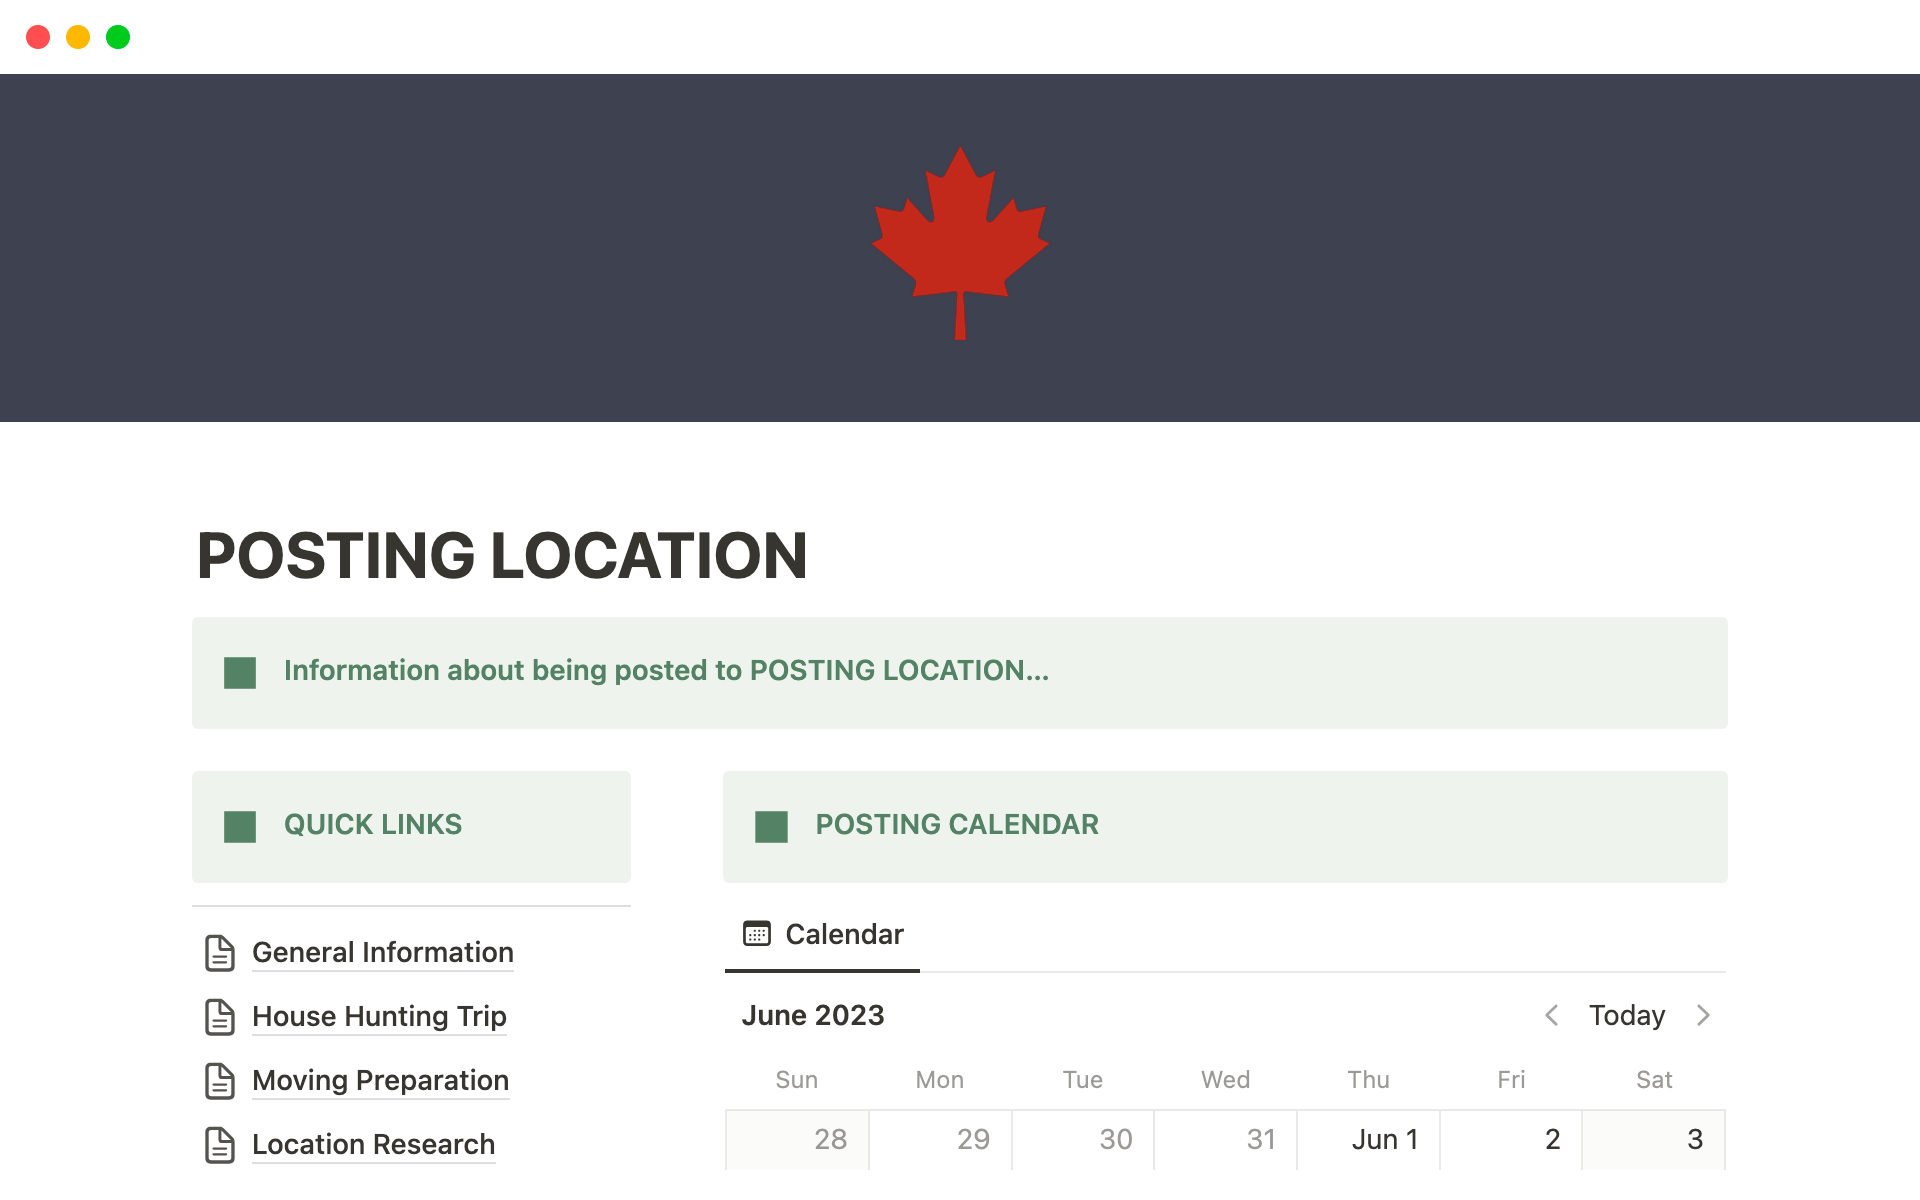 Easy to use dashboard for making sense of Canadian Military Postings.